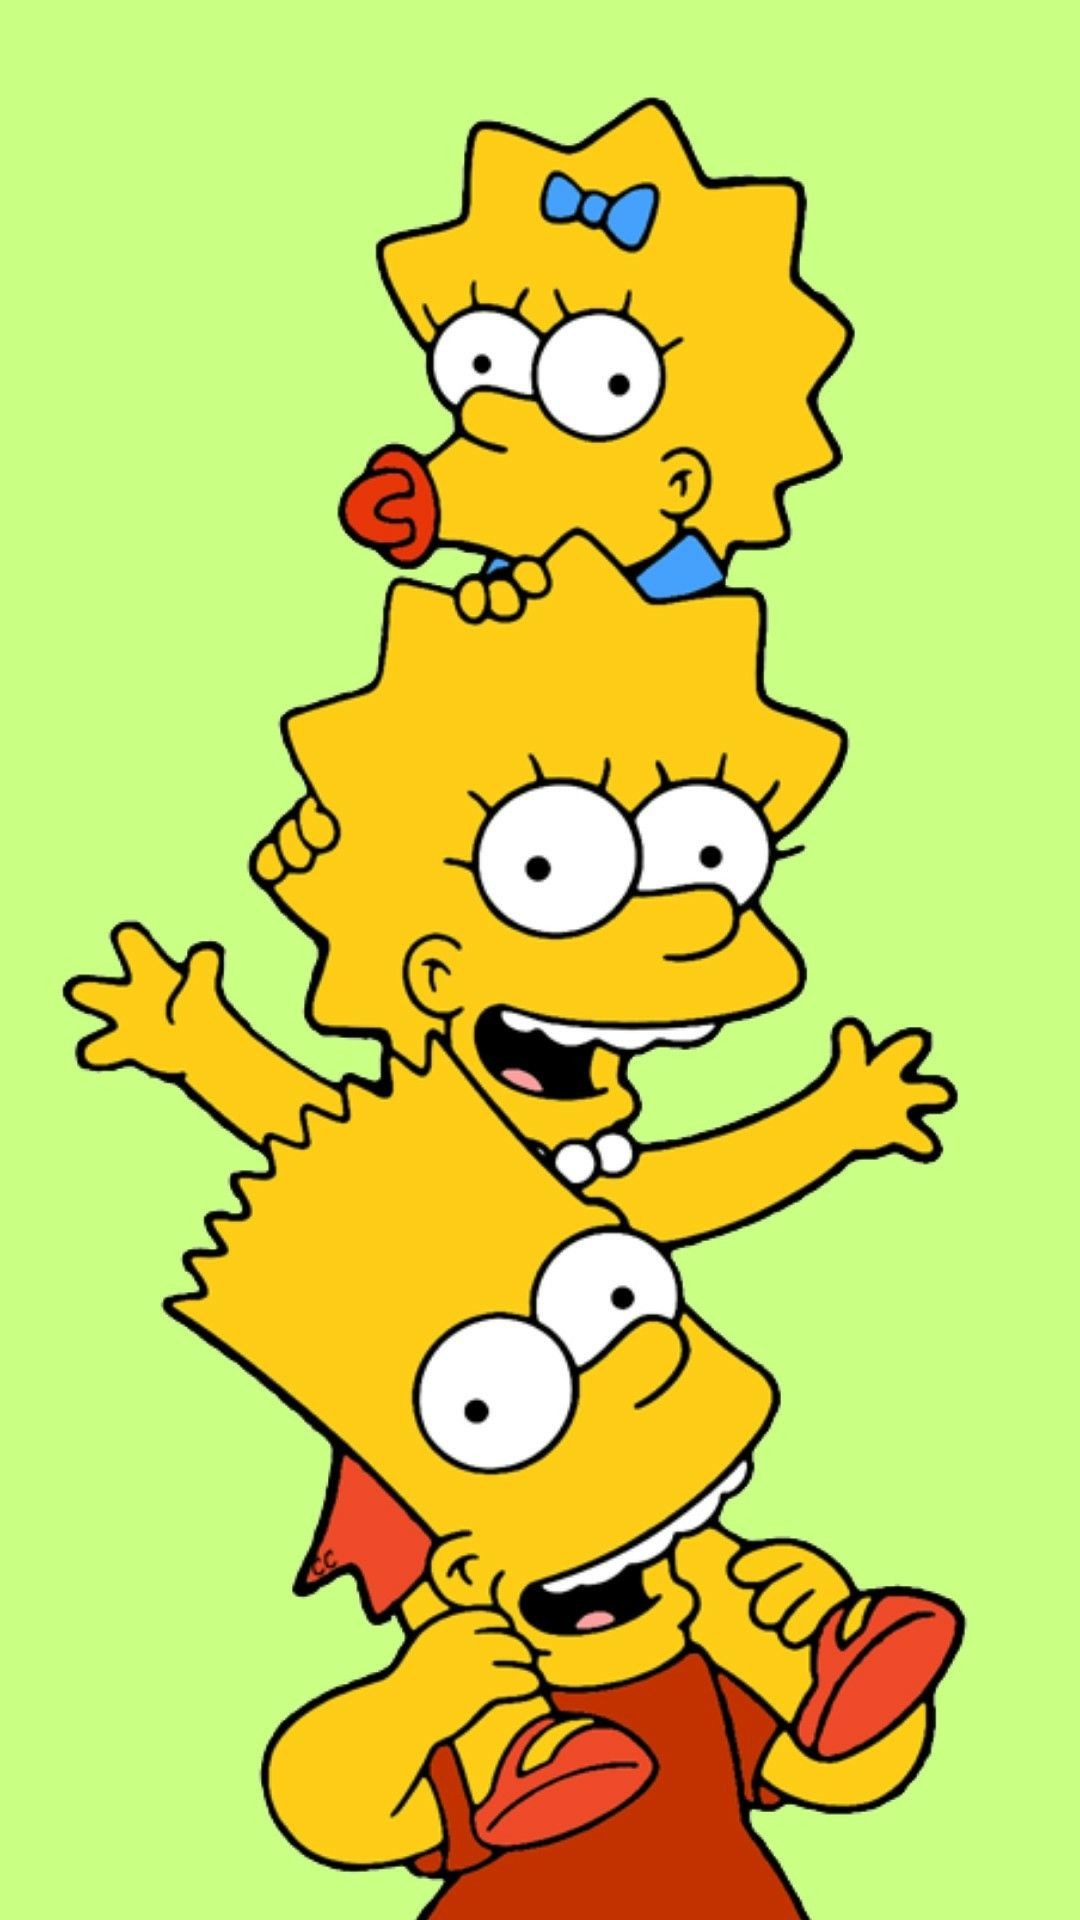 1080x1920 Wallpapers The Simpsons 6